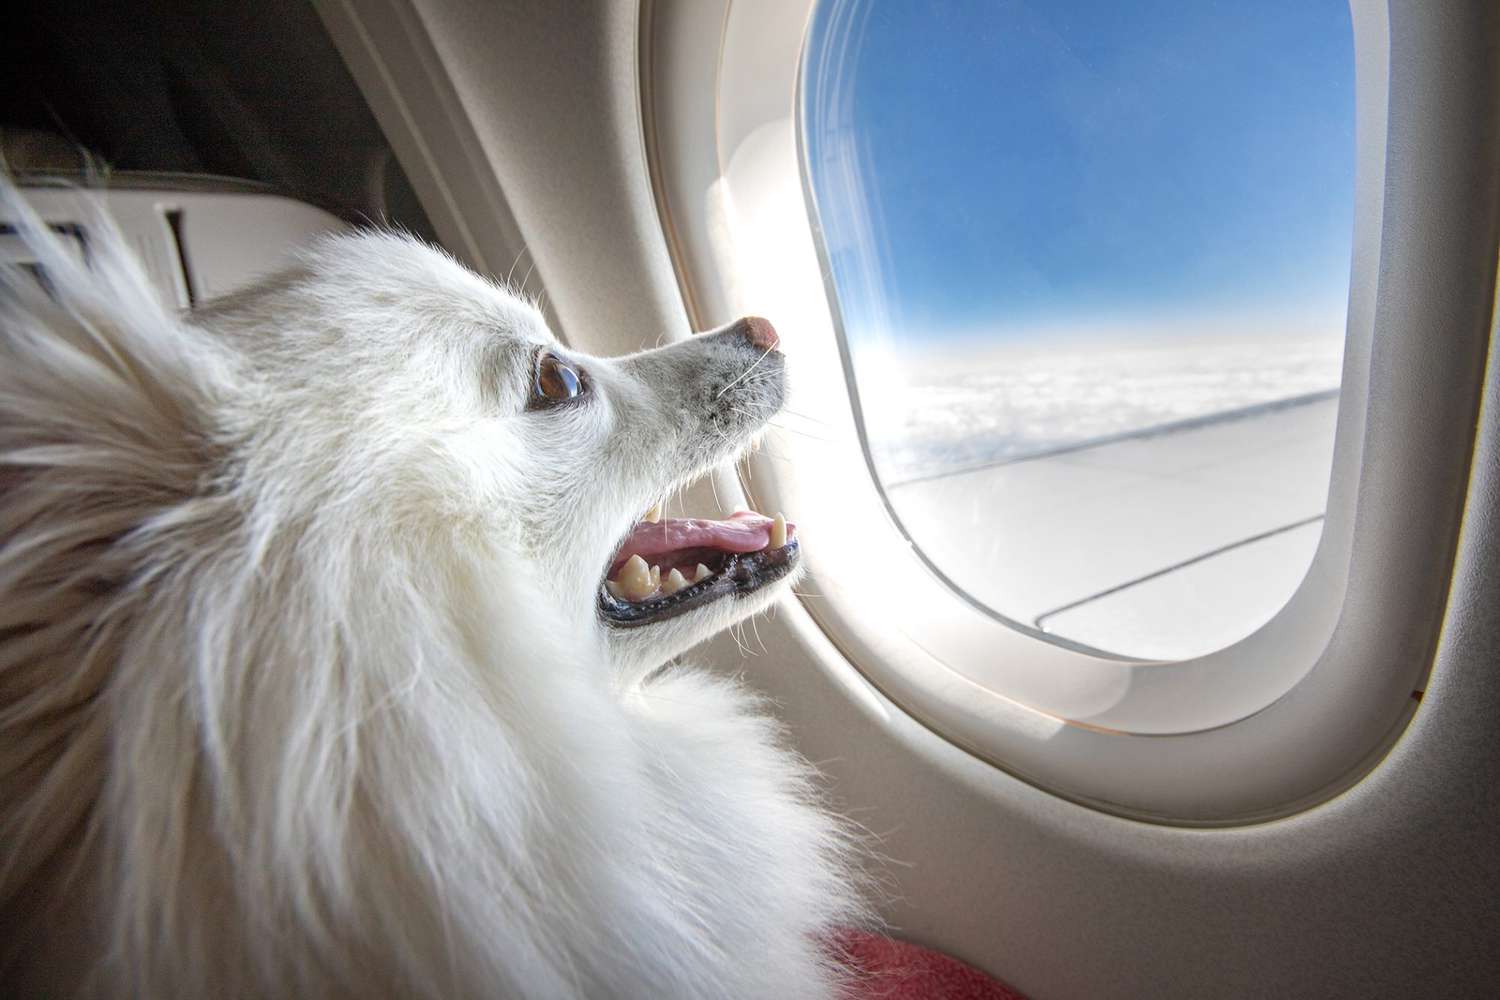 airlines that allow dogs flying with a dog in cabin airlines that allow dogs in cabin flying with pets pet flights dog flights airlines that allow pets in cabin airlines that fly dogs airlines that allow dogs in cargo airlines that allow pets flights that allow dogs air travel with dogs air pets pet cargo airlines dog airline pet travel airlines airlines travel dog flight carrier pets allowed in flight pets are allowed in flight dogs are allowed in flight flights that allow dogs in cabin cargo flights for dogs cargo pet travel pet air travel in cabin pet carrier flying pets in cargo dog in cabin flight flights with dogs in cabin dogs allowed in flights pet cargo flights dog travel in flight airlines that fly dogs in cargo dog cargo airlines dogs that fly in cabin dog carrier dogs in cabin airlines dog carrier for flying dog air which airlines fly dogs dogs traveling in cargo flights for dogs in cabin dogs and flying airlines and dogs airlines that allow pets in cargo travel with dog in flight airlines that fly dogs in cabin air travel dog carrier air travel with dogs in cabin airlines allowing dogs in cargo dog air travel carrier any airlines flying in cabin with dog flying dog in cabin dog is allowed in flight airlines to fly with dogs dog in air flights that allow dogs in cargo travel with dog in cabin airline cabin dog carrier a dog flying which flight allows pets dogs in flight cabin flight with dogs allowed airlines with dogs in cabin flights that allow pets in cabin airlines that allow dogs to fly dog in cargo flight dog airline cargo dog travel airline cargo airlines flying with dogs air cargo for dogs dog air carrier airlines that allow in cabin pets airlines that allow pet travel airline travel dog carrier flights to europe airline flights flying with a dog air travel air flight fly airlines low cost flights european airlines dog flight cost dog airline carrier cargo flight fly air flight cost travel flights dog cabin cost to fly a dog low cost airlines europe pet airlines flights in europe cargo dog low cost flights europe flying dogs in cargo fly flight fly cargo pet flight cost i fly airlines flying with a small dog airlines for europe european cargo airlines flight cabin low cost fly travel with dog to europe european air airlines that accept dogs dog travel airlines low flight flying with air flying air any flight small dog airline carrier flying with small dog in cabin airlines that allow small dogs in cabin flights from europe small flights airlines that fly from airlines that accept pets airlines that allow dogs in cabin europe europe air travel air travel to europe airlines that fly to europe dog in cabin flying a dog in cargo cost cost to fly dog cargo low cost carriers europe flying to europe with a dog flight to europe cost cost to fly a dog in cargo cost of flying dog in cargo airlines accepting pets in cargo european carriers dogs carriers traveling with a small dog air travel in europe cost for dog to fly cost to travel with a dog which airlines accept dogs cabin dog flights with pets in cabin european airlines that allow dogs europe by air european airlines that allow dogs in cabin airline flights for dogs flights that accept dogs small dog flight carrier low cost airlines to europe airlines that accept dogs in cargo fly on dog air travel with small dog airlines that accept dogs in cabin fly the dog dog flight cargo flights dogs allowed small dogs flying in cabin air flights for dogs air travel carrier for dogs cost of flight to europe dogs and flights traveling with dog in cargo airlines which allow dogs in cabin small dog carrier for air travel airlines that accept pets in cabin airlines that accept pets in cargo dogs in the cabin airlines small european airlines dogs allowed in cabin airlines fly on a dog small dogs on flights airlines from europe cargo dog flights small dog airline travel carrier air flights to europe airlines flying to europe airlines that fly with dogs airlines that allow small dogs cost to travel with dog on airlines european airlines that allow pets in cabin cabin for dogs airline flights to europe cost to fly dog in cargo cost of dog travel by air cost of traveling with dog flights which allow dogs airline travel with dogs in cabin cost of flying a dog in cargo low cost fly europe flights allowing dogs in cabin flying with a dog to europe airlines that travel to europe in cabin dog travel dogs and air travel european air carriers airlines that allow dogs to fly in cabin cost for dog on flight flying small dogs on airlines airline cost for dogs airlines that allow dogs europe europe flight cost airlines that allow pets in cabin europe airlines that allow small pets in cabin cost of dog on flight flying pet dog flying with dogs in europe europe to europe flights europe air cargo flying with a pet dog airlines that allow dogs as cargo flying with a small dog in cabin flying with dogs europe airlines that allow pet in cabin cost to travel with dog dogs allowed on airlines airline pet carriers for dogs small dog carriers for airlines dog flying as cargo airlines that allow pets to fly airlines that allow pets to fly in cabin dogs to fly flights to and from europe airlines to fly to europe air to europe cost for flying with a dog dog airline flights travel flights to europe airlines that allow dogs flying with a dog in cabin airlines that allow dogs in cabin flying with pets pet flights airlines that allow pets in cabin airlines that fly dogs pet airlines airlines that allow dogs in cargo pet cargo airlines dog flight cost airlines that allow pets flights that allow dogs air pets pet travel airlines pet flight cost air travel with dogs pets allowed in flight pets are allowed in flight dogs are allowed in flight cargo pet travel pet air travel dog airline flights that allow dogs in cabin flying pets in cargo airlines that accept pets pet cargo flights airlines that accept dogs dogs allowed in flights cargo flights for dogs dog travel in flight dog travel airlines airlines that allow small dogs in cabin dog in cabin flight flying with small dog in cabin flights with dogs in cabin airlines that allow pets in cargo dogs that fly airlines that fly dogs in cargo dog cargo airlines airlines and dogs which airlines fly dogs dogs traveling in cargo travel with dog in flight which flight allows pets pet friendly airlines jetblue pet policy airlines that allow large dogs in cabin air canada pet policy dogs on planes dog friendly airlines flying with large dog in cabin traveling with a dog on a plane flights for dogs air canada pet cargo air canada pets dogs flying on planes dogs on airplanes taking a dog on a plane pets on planes best airline for pets jetblue pets jetblue dog policy airline pet policy pet friendly flights rabbit flights traveling with cats on a plane international airlines that allow cats in cabin flying with cats in cabin dog plane ticket best airline to fly with pets air canada flying with pets traveling with a cat on a plane airlines that ship dogs air canada dog policy air canada pet in cabin most pet friendly airlines best airlines for dogs shipping dogs by air air canada pet travel pets on airplanes jetblue pet travel dog flight ticket pet flight ticket flying with a puppy in cabin jetblue pet cargo taking a cat on a plane pet shipping airlines jetblue flying with pets best airlines to ship pets bringing a dog on a plane flying a dog in cargo pet transport airlines pet friendly airlines in cabin best airline to travel with pets best airline to fly with dog pet air transport shipping pets by air dogs flying air canada pet shipping jetblue animal policy airlines that allow large dogs in cabin 2021 dog friendly flights dog airline ticket taking pets on a plane cat flight dogs on planes rules dogs on international flights air canada pet policy international flights shipping a puppy by plane airlines that let you fly with dogs transporting dogs on planes traveling with a puppy on a plane jetblue pet policy cargo airline dog policy animal cargo flights pitbull friendly airlines airlines that allow large dogs cat friendly airlines best pet friendly airlines dogs allowed on planes pet friendly international airlines pet plane tickets airlines that allow rabbits pet airways cost bringing a cat on a plane bunny flights bringing cat on plane dog carry on plane airlines that fly pets air canada dogs taking your dog on a plane shipping puppies by air pitbull friendly airlines 2021 dog plane ticket cost airlines that take dogs airline that allows large dogs in cabin best airlines to ship pets internationally cost of pet transport by air taking my dog on a plane best airline to fly pets in cargo carry on pet flying a puppy on a plane pet friendly airlines 2021 air canada pet cargo cost taking a puppy on a plane cat flight ticket price air travel with cats dog flight ticket price air canada pet transport flying with your dog in the cabin international airlines that allow pets in cabin airlines that allow large dogs in cargo cheap flights with pets flying with your pet international pet travel airlines jetblue dog policy 2021 cost to bring dog on plane airlines that transport dogs airplane travel with dog cat in cabin international flight air canada cat in cabin jetblue large dog policy traveling with rabbits on airplanes jetblue airlines pet policy jetblue pet policy in cabin cheapest airline to fly with pets airline rules for dogs pets on international flights cat flying on plane dog only airline air canada animal cargo do airlines allow pets jetblue flying with dog dogs on airplanes rules air canada dog cargo most dog friendly airlines jetblue dogs puppy flights dog friendly airlines 2021 jetblue pet in cabin flights for dogs only bring pet on plane best airline for flying with dog dog allowed in plane taking pets on flights do dogs fly airlines that allow big dogs in cabin pet airline ticket air canada in cabin pet airlines dogs in cabin dog flight transport flying your dog in cargo flying with a dog air canada traveling with birds on airlines book flight with pet dog ticket flight dog in airplane cabin best airline to travel with dogs animals allowed on planes cat plane ticket airlines that allow pets in cabin to hawaii air animal transport airlines that allow cats air canada dog in cabin air canada animal transport carrying pets in flight best airline for large dogs taking dog on airplane rabbit friendly airlines small dogs on planes pet in cabin airlines dog air transport fly with my dog in cabin pet safe airlines dog ticket in flight best way to fly with a dog jetblue cat policy airlines that let dogs fly in cabin pitbull friendly airlines 2020 flights for pets only book a flight for a dog animal flight transport pet travel in flight which airlines fly pets jet airways pet policy pets allowed on planes puppies on planes airlines and pets large dogs on planes pet air cargo large dog in cabin flight pet flight ticket price jetblue jet with your pet bringing a puppy on a plane best airlines for pets in cabin traveling with small dog on plane pet airlines international dog in cabin international flights big dogs on planes airlines that allow rabbits in cabin best dogs for plane travel flights for dogs prices air canada fly with dog pet flight transport cat flight ticket air canada dog travel dogs that can fly on planes airlines that allow cats in cabin international pet friendly airlines usa best airlines for pets international flying animals pets taking dog on flight airlines that allow guinea pigs dog flying airplane pets by air puppy flying on airplane best flights for dogs cost to take dog on plane pet travel flights pet only airlines large dog friendly airlines cheapest airline for pets dogs that can travel on planes which airlines transport dogs bird friendly airlines flight with pet in cabin pet friendly airlines flying with pets pet flights pet cargo airlines pet airlines airline pet policy best airline for pets air pets airlines that allow pets in cabin airlines that allow pets pet friendly flights best airline to fly with pets pet travel airlines pet flight cost pet transport airlines cargo pet travel pet air travel pet friendly airlines in cabin best airline to travel with pets pet air transport flying pets in cargo pets allowed in flight pet cargo flights pets are allowed in flight best pet friendly airlines carry on pet airlines that fly pets airlines that accept pets flying with your pet cost of pet transport by air best airline to fly pets in cargo airlines that allow pets in cargo carrying pets in flight pet in cabin airlines which airlines fly pets airlines and pets pet air cargo best airlines for pets in cabin pet flight transport pet friendly airlines usa pets by air pet travel flights pet travel in flight which flight allows pets flight with pet in cabin american airlines pet policy american airlines pet cargo american airlines pets american airlines pet travel airline pet carrier american airlines flying with pets hawaiian airlines pet policy best airlines us airlines pet travel major airlines american airlines cargo pet american airlines pet fee fly airlines hawaiian airlines pet cargo may airlines pet policy american airlines carry on pet best pet carrier for flying american airlines pet in cabin travel airlines american airlines pet cargo cost american airlines pet transport best airline pet carrier can airlines american airlines in cabin pet hawaiian airlines pet travel airline pet fees in cabin pet carrier carry on pet carrier pet flight service american airlines pet policy cargo american airlines and pets american pet cargo american airlines pet travel cargo hawaiian airlines pets american airlines pet travel policy pet cargo american airlines pet in cabin american airlines hawaiian airlines pet in cabin american pet travel main airlines american airlines policy on pets pet flight carrier american airlines pet cost air travel pet carrier american airlines checked pet american airlines pet policy in cabin flying with a pet american airlines american air pet policy best airlines credit cards american airlines carry on pet policy cargo pet carrier hawaiian airlines flying with pets pet carrier for flying american airlines pet in cabin policy hawaiian air cargo pets flying with pet american airlines pet policy for american airlines hawaiian airlines pet carry on american airlines pet flights american airlines allow pets american airlines traveling with a pet american flying with pets airlines with best pet policy american airlines pet in cargo pets in cargo airlines hawaiian air pet policy american air pet cargo pet airfare flying with pets in cabin american airlines flying with a pet airlines that fly pets in cargo american cargo pets american airline pet cargo policy cargo pet friendly american airlines pet transport cargo airline with best pet policy airline pet transportation services pet cabin airlines which airlines carry pets american airlines pet check in cost to fly a pet pet air travel service flights that allow pets in cabin hawaiian airlines pet cargo cost airlines accepting pets in cargo american airlines cargo for pets in cabin pet american airlines hawaiian airlines pet carrier carry on pet fee travel pet carrier airline airline cabin pet carrier pet travel in cabin american pet in cabin cabin pet american airlines airlines all best airline for pets in cargo pet policy on american airlines airline carry on pet carrier flight pet policy american airlines pet friendly any airlines american airlines cargo pet policy american airlines pet service checked pet american airlines flying with my pet travelling with pets in flight airlines that allow pet travel which airlines transport pets hawaiian airlines pet policy cargo cargo pets american airlines pet friendly airlines cargo airlines t airlines that fly pets in cabin american airlines pet cargo flights pet air transportation services american airlines service pet policy pet transport american airlines friendly airlines pet policy hawaiian airlines airline pet cargo services airlines that accept pets in cargo airlines that accept pets in cabin american airlines air cargo pets hawaiian cargo pets best airline to fly with pets in cabin airlines that carry pets airlines that allow in cabin pets air travel with pets in cabin flights for pets cost pet can fly best airlines for flying with pets airlines pets in cargo airlines that allow carry on pets air pet carrier american in cabin pets american airlines flights with pets flying your pet in cargo pet carry in flight airline cargo pet carrier hawaiian pet cargo flights with pet cargo best pet policy airline pet flying policy flying with pets hawaiian airlines american air cargo pets best flights for pets cost of pet travel on airlines american airlines pet policy cost air cargo pets transport service pets in cargo american airlines american airline pet travel cost american air pets pet transport by flight best airline for pet travel in cabin airlines that check pets airlines and pets in cabin pet friendly transport fly cabin air cargo pet carriers us airlines pet policy flying a pet in cargo fly with your pet in cabin pets carriers best airline for flying with pets cabin carrier pet flight fees the best pet carrier for airline travel pet friendly air travel best pet carrier for airline travel in cabin pet flights fly in cabin american airline pet cost airline pet travel policy airlines that carry pets in cargo american pet airlines checked pets airlines pet carrier cabin hawaiian airlines pet transport american airlines checked pet policy pet travel carriers for airlines check in pets airline cost of traveling with pet by air american airline pet cabin us air pet policy airlines that allow pet in cabin flying with your pet in the cabin hawaiian airlines pet travel policy airline travel with pets in cabin pet airline services cost to travel with pet on airlines best airline carrier pet carrier for airline cargo american airline pet flight american airlines pets on flights flying with pets american pet air flights airlines to travel cost of pets on airlines american airline pet cargo cost air flights for pets best airline for pet transport pet airlines usa pet travel airlines cost airlines that allow pets to fly airlines that allow pets to fly in cabin best airline for pet travel in cargo hawaiian air pet travel hawaiian airlines flying pets pet air usa american airline pet policy cargo pet carriers for in cabin air travel airlines flying pets cargo airlines and pet travel us airlines pet travel air pet cargo american airline pet carry on policy pet air service pets in airline cabin pet air carrier service airlines that will fly pets travel air pet carrier american airline pet carrier policy airline flights for pets pets flying as cargo pet air cargo carriers american airlines and flying pets air pet transportation pets and air travel pet flying fees airline carriers for pets pet airline travel cost airlines that allow pets in cabin airlines that allow large dogs in cabin are dogs allowed on planes airlines that allow dogs in cabin can dogs go on planes what airlines allow dogs in cabin can you take dogs on a plane can you take your dog on a plane what airlines allow pets in the cabin taking dogs on planes are pets allowed in flight can you bring pets on a plane weight limit for dogs on planes airlines that allow cats in cabin can you take pets on a plane can you bring your dog on a plane are dogs allowed in flight airlines that allow large dogs in cabin 2021 pets allowed in flight is pet allowed in flight dogs on planes rules can puppies fly on planes which airline allows dogs in cabin is dog allowed in flight dogs are allowed in flight pet friendly airlines in cabin taking pets on a plane can you take a small dog on a plane can you take animals on a plane are dogs allowed in planes does klm allow pets in cabin lufthansa pet policy in cabin which airlines allow cats in cabin which airlines allow large dogs in cabin does lufthansa allow pets in cabin can i bring a puppy on a plane flights that allow dogs in cabin can i bring dog on plane can you take dogs on flights can you fly a dog on a plane does delta allow pets in cabin are dogs allowed on flights what airlines allow cats in cabin can you bring a small dog on a plane does air france allow pets in cabin does qatar airways allow pets in cabin does united allow pets in cabin can i bring my pet on a plane airline that allows large dogs in cabin can i take my pet on a plane dogs allowed in flights airlines that allow pets in cabin singapore does air canada allow pets in cabin alaska airlines pet policy in cabin airlines that allow small dogs in cabin does jetblue allow pets in cabin what airlines allow large dogs in cabin do any airlines allow dogs in the cabin does emirates allow pets in cabin airlines that allow big dogs in cabin international airlines that allow pets in cabin what airlines allow reptiles in cabin airlines that allow large dogs in cargo dog weight limit plane dog in airplane cabin what dogs are allowed on planes can you take pets on flights small dogs on planes do any airlines allow large dogs in the cabin can small dogs travel on planes does aeromexico allow pets in cabin does southwest allow pets in cabin how to travel with a large dog on a plane which airlines allow rabbits in cabin can i take my small dog on a plane can you carry pets on a plane what airlines allow birds in cabin can you bring a big dog on a plane max weight for dog on plane can u take dogs on a plane can you bring big dogs on a plane what is the weight limit for dogs on planes does alaska airlines allow pets in cabin can you take a big dog on a plane can i take my emotional support dog on a plane which airlines allow birds in the cabin can you bring your pet on a plane can you take big dogs on planes does american airlines allow pets in the cabin are dogs allowed in international flights can you take cats on planes can i take a small dog on a plane airlines that allow esa dogs in cabin how to take dogs on plane dogs on flights rules airlines that allow birds in cabin dogs allowed on flights airlines that let dogs fly in cabin does british airways allow pets in cabin can i bring a small dog on a plane can i bring my small dog on a plane can you carry a dog on a plane does swiss air allow pets in cabin airlines that allow puppies in cabin can small dogs go on planes does philippine airlines allow pets in cabin can u bring pets on a plane does iberia allow pets in cabin can you travel with your dog on a plane southwest pet policy in cabin max size dog on plane does delta allow rabbits in cabin does hawaiian airlines allow pets in cabin can i bring my dog on a plane with me airlines that allow cats in cabin international can you bring puppy on plane how to take a big dog on a plane does virgin atlantic allow pets in cabin can you fly dogs on a plane can you travel with pets on a plane are pet dogs allowed in flights is dogs are allowed in flights airlines that allow medium dogs in cabin what airlines allow big dogs in cabin can you bring a large dog on a plane are dogs allowed on a plane can you take a large dog on a plane does korean air allow pets in cabin bringing my dog on a plane does dogs are allowed in flight flights with pets in cabin does turkish airline allow pets in cabin can we take pets on flight flights that allow pets in cabin airlines that allow dogs in cabin international does jetblue allow dogs in cargo can i bring a pet on a plane airlines that allow emotional support dogs in cabin international flights that allow dogs in cabin which airlines allow emotional support animals in the cabin taking a small dog on a plane international airlines that allow french bulldogs in cabin dogs on airlines in cabin pet are allowed in flight what airlines allow pet birds in cabin which airline allows big dogs in cabin can dogs go in planes are there any airlines that allow dogs in the cabin which airlines allow hamsters in cabin dog friendly airlines in cabin does american airlines allow pets in cabin does delta allow dogs in cabin can u take your dog on a plane which airlines allow small dogs in cabin carry on pet fee can i take a pet on a plane can you carry your dog on a plane does cathay pacific allow pets in cabin what airline allows large dogs in cabin does united airlines allow pets in cabin dog weight airline cabin can i bring pet on plane does frontier allow pets in cabin which dogs are allowed on planes what airlines allow dogs in cabin international can u take pets on a plane can you bring your dog on the plane dog size allowed on plane can i bring my dog on a flight can you bring large dogs on a plane what airlines let dogs fly in cabin does delta allow pets in cabin on international flights which airline allows cats in the cabin can you take large dogs on a plane dog is allowed in flight can you bring a dog on a flight airlines that allow reptiles in cabin can dogs fly in the cabin of a plane which international airlines allow pets in cabin does aer lingus allow pets in cabin how to take a small dog on a plane can i hold my dog on a plane can you take your dog on plane can you bring dogs on plane can you hold your dog on a plane air canada carry on pets how to bring a small dog on a plane airlines that allow bunnies in the cabin are dogs allowed on the plane are dogs allowed in first class on planes can i bring my dog on the plane with me how to travel with a small dog on a plane can i bring a big dog on a plane which airlines allow guinea pigs in cabin does alitalia allow pets in cabin taking a service dog on a plane airlines that accept pets in cabin can you bring pets on planes european airlines that allow dogs in cabin can cats travel in the cabin of a plane can dogs go in cabin on plane does southwest allow dogs in cabin which airlines allow service dogs in cabin can i bring emotional support dog on plane are you allowed to bring pets on a plane can i bring my large dog on a plane can you bring service dogs on a plane international airlines that allow dogs in cabin can dogs be on planes what airlines allow cats in the cabin can i take my dog on a delta flight how do you bring your dog on a plane which airlines allow pets in cabin for international flights pets in airplane cabin can you fly your dog on a plane do any airlines allow big dogs in cabin does spirit airlines allow pets in cabin airlines that accept rabbits in cabin does etihad allow pets in cabin can you take dogs international flights can you take pet on plane airlines that allow in cabin pets can dogs travel in the cabin of a plane what airlines allow puppies in the cabin can i take my large dog on a plane which airlines allow small pets in cabin airlines that accept dogs in cabin can you take a pet on the plane which airlines allow dogs in cabin international which international airlines allow dogs in cabin does delta allow pets in the cabin what flights allow dogs in cabin does air canada allow dogs in cabin airlines who allow dogs in cabin is it allowed to bring pets on a plane taking a large dog on a plane flights that allow large dogs in cabin which domestic airlines allow pets in cabin dogs airplane cabin does delta allow dogs on flights can you take small pets on a plane how can you bring a dog on a plane taking big dogs on planes dog size airplane cabin dogs allowed in planes are dogs allowed in airplane cabins do any airlines allow pets in cabin can dogs travel in airplane cabin do airlines allow pets in cabin delta airlines pet policy in cabin dogs that are allowed on planes does klm allow dogs in cabin does frontier airlines allow pets in cabin size of dog allowed in cabin what airlines allow small dogs in cabin what airlines allow small dogs in the cabin what airlines allow pets in cabin international international flights that allow pets in cabin which airlines accept pets in cabin does united airlines allow pets in cabin on international flights airlines which allow dogs in cabin which airlines accept dogs in cabin dogs allowed in cabin airlines flights that allow cats in cabin airlines allowing cats in cabin are dogs allowed to fly in cabin what airlines accept dogs in cabin what international airlines allow pets in cabin dogs allowed in plane cabin how do you take dogs on planes american airline pet policy in cabin air canada pet policy in cabin can u take dogs on planes british airways allow pets in cabin which airlines let dogs fly in cabin are you allowed to bring dogs on a plane does air transat allow pets in cabin does alitalia allow dogs in cabin european airlines that allow pets in cabin how are dogs allowed on planes can you take a dog on a plane internationally can you bring service dog on plane how to take pets on flights jetblue dog policy in cabin which airlines allow pets in cabin on international flights does british airways allow dogs in cabin airlines that allow pets in cabin on transatlantic flights airlines that allow small pets in cabin what airlines do not allow pets in cabin does spirit airlines allow dogs in cabin alitalia pet policy in cabin can you bring small pets on a plane what airline allow pets in cabin airlines allow pets in cabin international asian airlines that allow pets in cabin which airlines allow dogs to fly in cabin airlines that allow animals in cabin flights allowing dogs in cabin planes that allow dogs in cabin international airlines allow pets in cabin airlines that allow guinea pigs in cabin can you take service dogs on a plane airlines allowing large dogs in cabin are there any airlines that allow dogs what airlines allow cats to fly in cabin can you take puppies on planes airlines that allow dogs to fly in cabin do any airlines allow large dogs in cabin airlines that allow pet in cabin united airlines bring dog what airlines allow large dogs in the cabin what airlines allow dogs on flights what airlines allow dogs to fly in cabin large dog in airplane cabin can a small dog go on a plane does alaska airlines allow dogs in cabin can you carry on a small dog on a plane which airlines allow pets to travel in the cabin which airline allows pets in cabin international airlines that allow hamsters in cabin airlines that allow pets to fly in cabin delta dogs on planes does southwest airlines allow pets in cabin what airlines allow large dogs to fly in cabin what airlines allow dogs to travel in the cabin taking my service dog on a plane which airlines allow dogs to travel in the cabin can you fly dogs on planes jet blue pet policy in cabin airlines that allow large pets in cabin airlines that allow large dogs in the cabin airlines that do not allow pets in cabin air canada small dog policy airlines that allow dogs in cabin on international flights jetblue pet policy cabin airlines that allow pets in cabin international flights can i bring my small dog on the plane can i buy a seat for my dog on plane